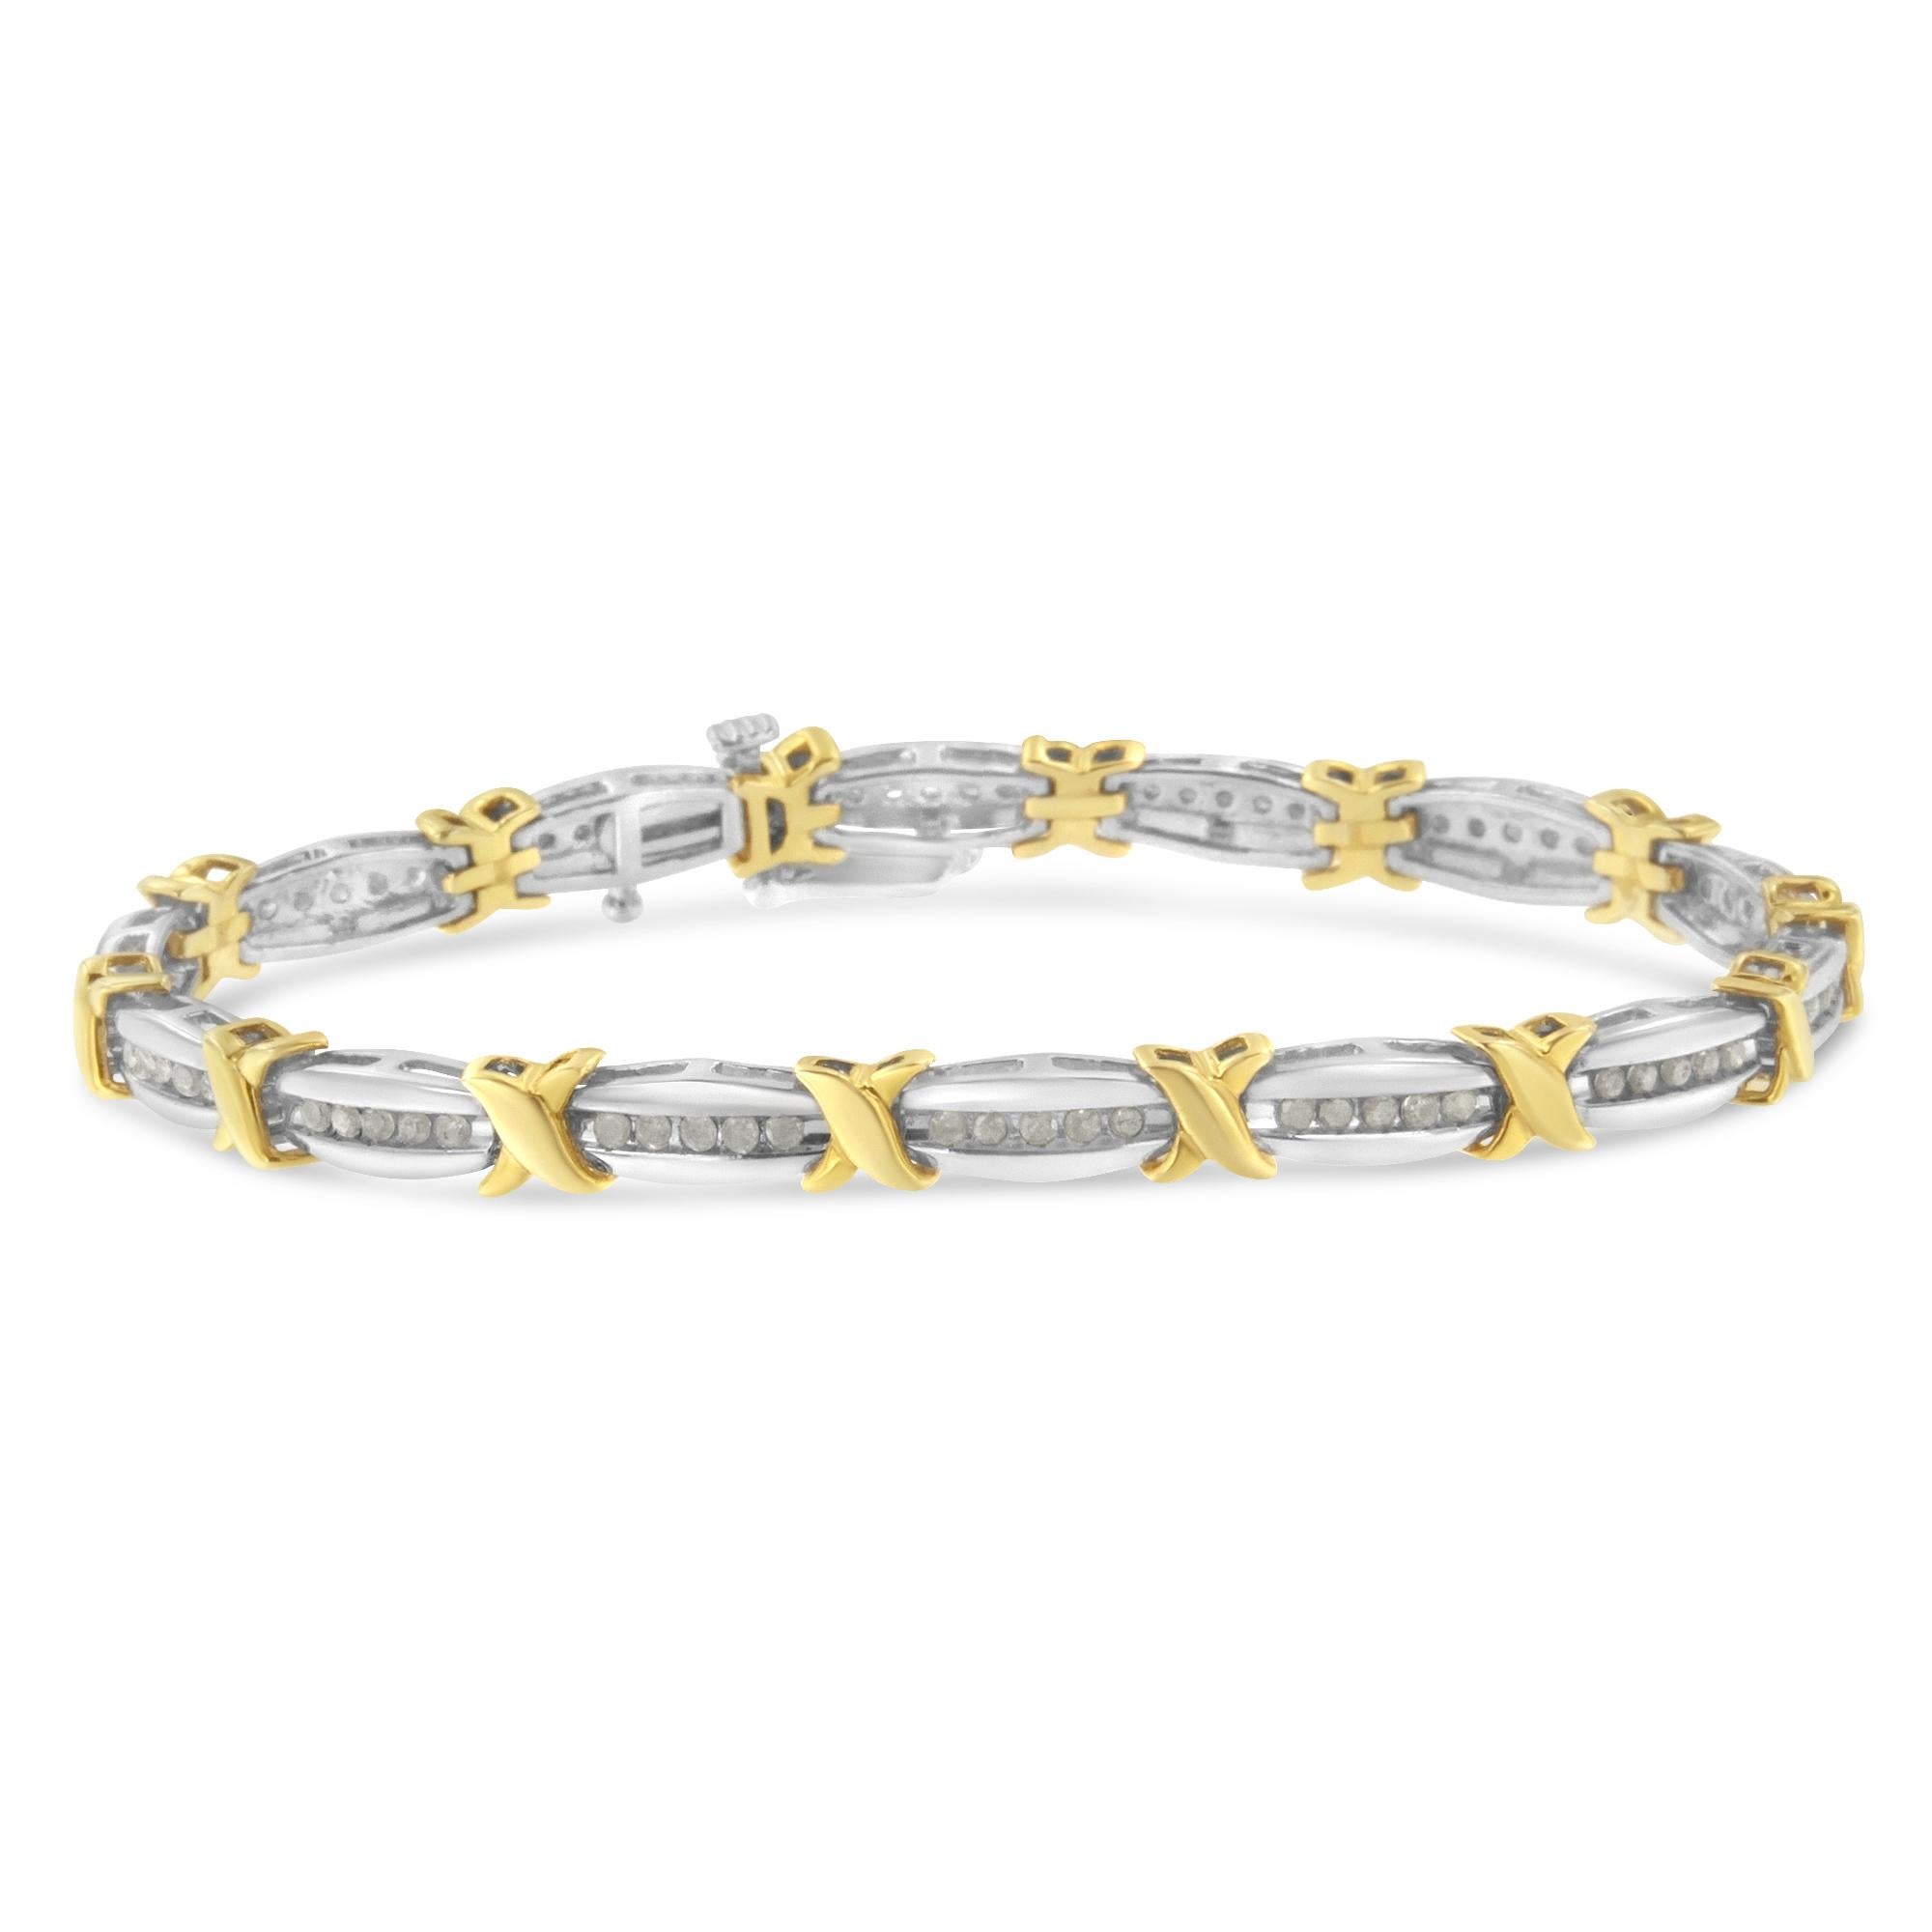 This 7” tennis bracelet features 1.0 carat total weight of rose-cut diamonds. The bracelet features alternating tapered and x shaped links with channel set stones. This bracelet is crafted out of sterling silver with a 10K yellow gold and rhodium